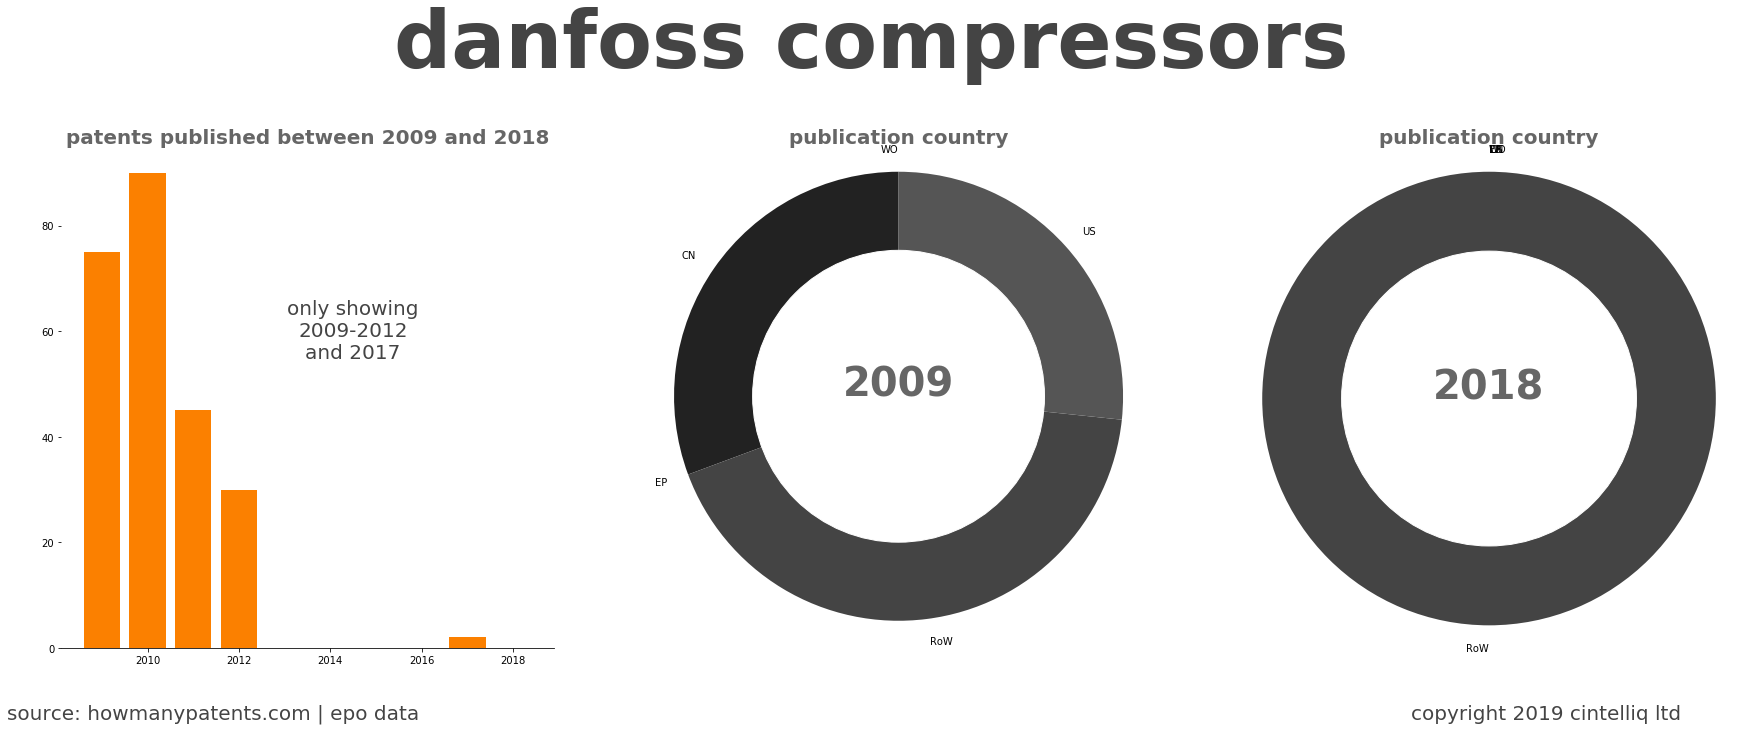 summary of patents for Danfoss Compressors